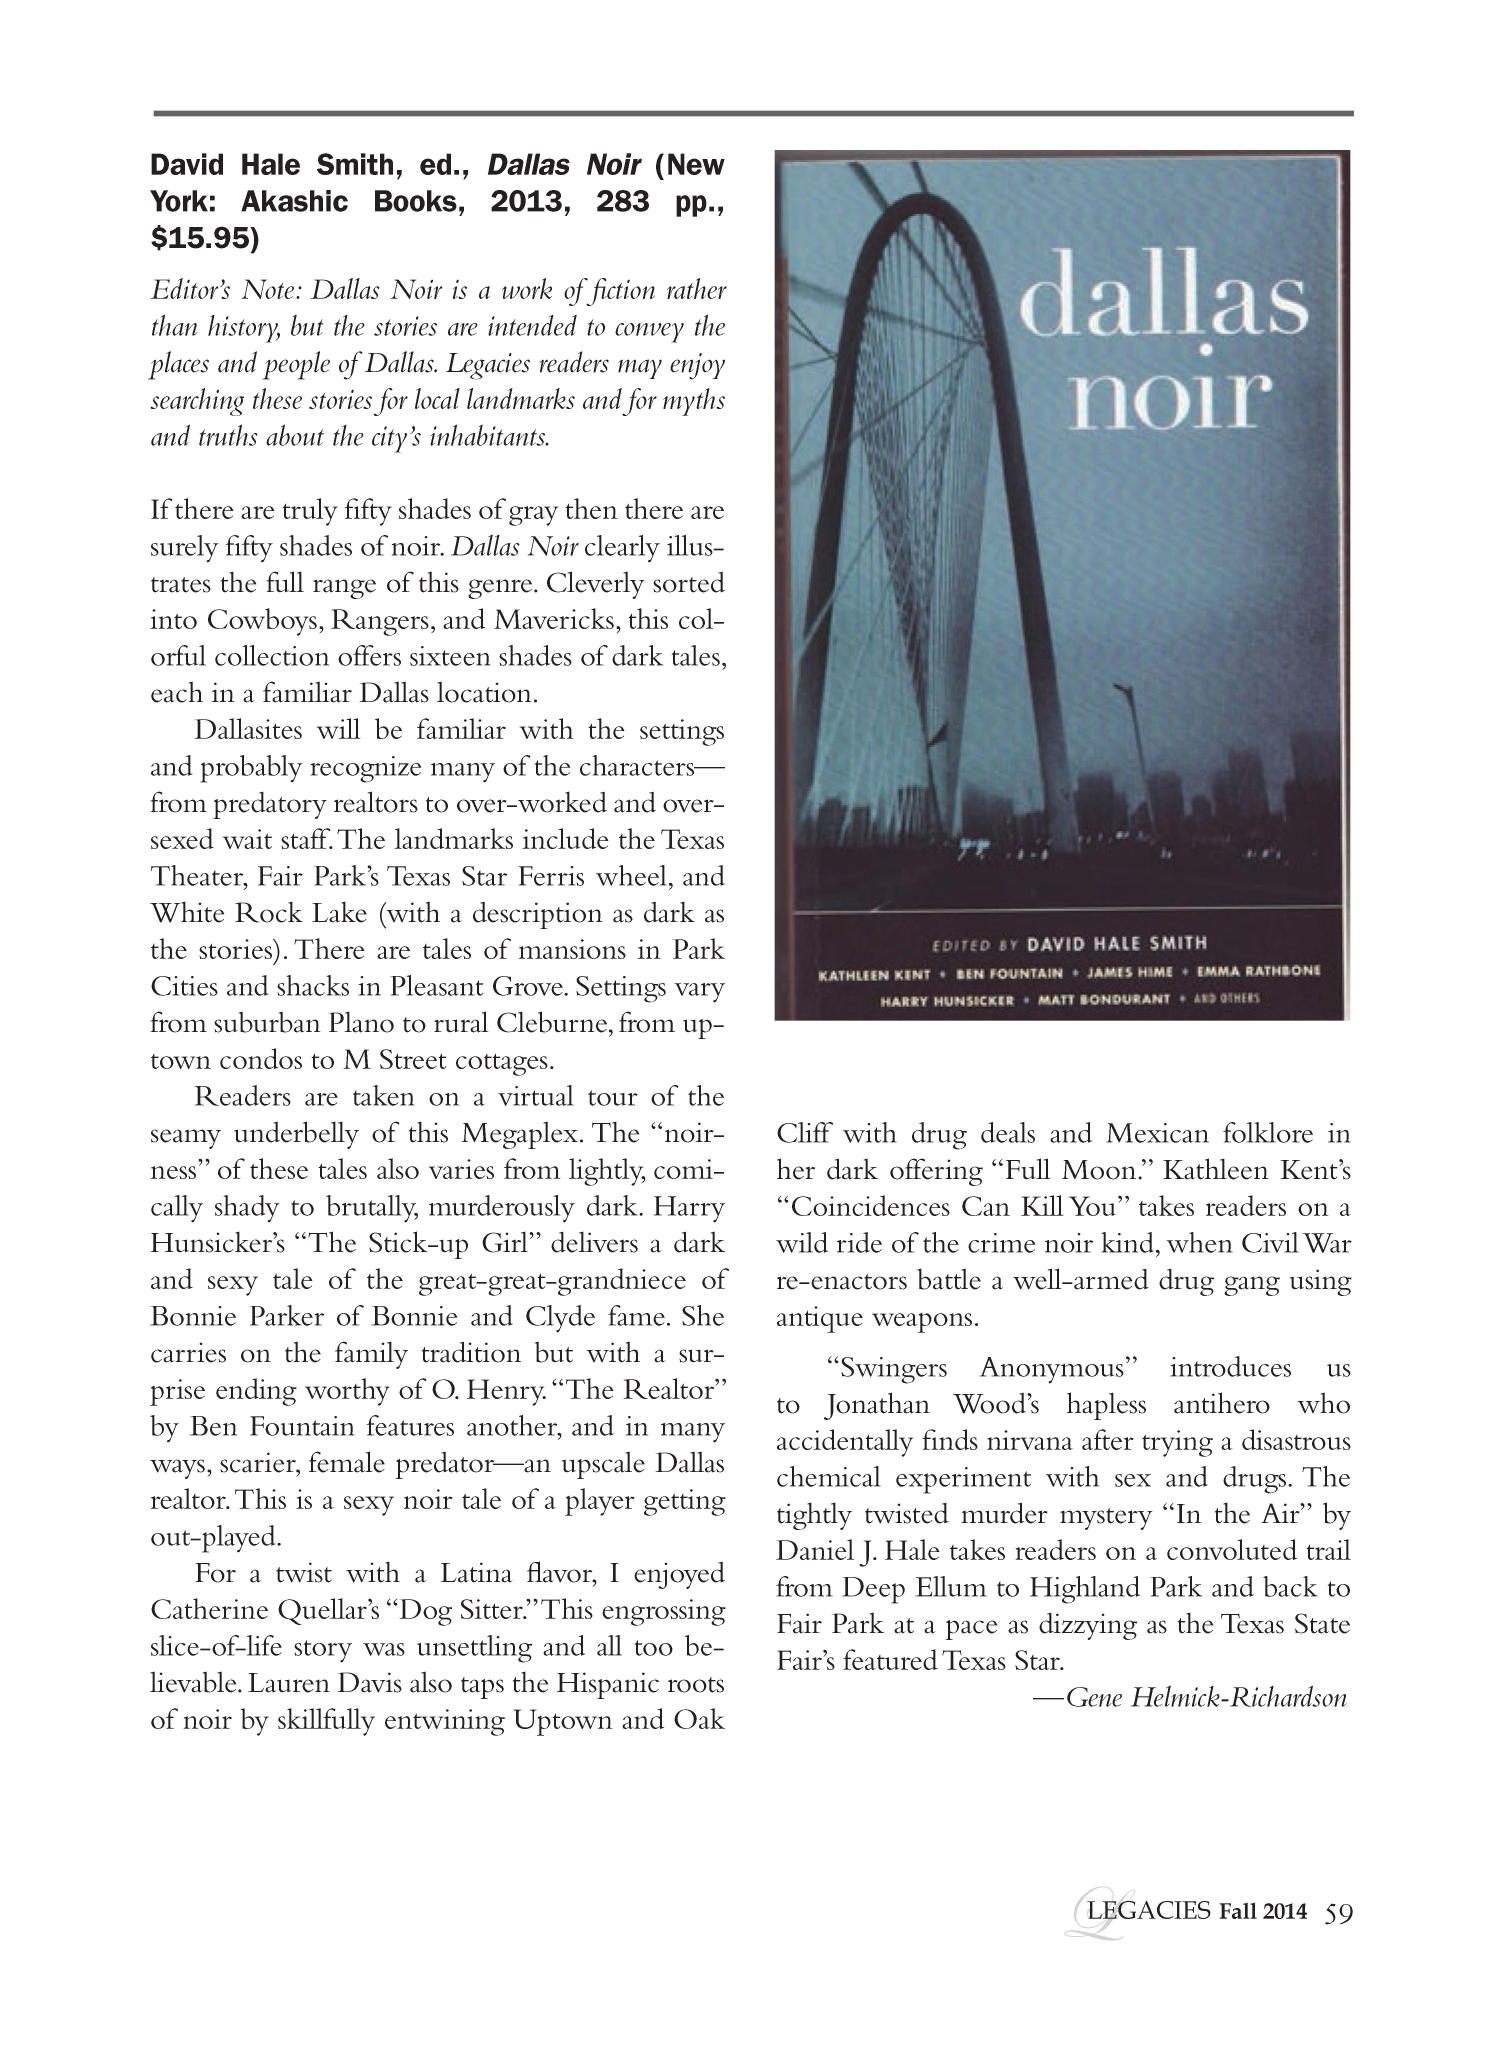 Legacies A History Journal for Dallas and North Central Texas, Volume 26, Number 2, Fall 2014 photo